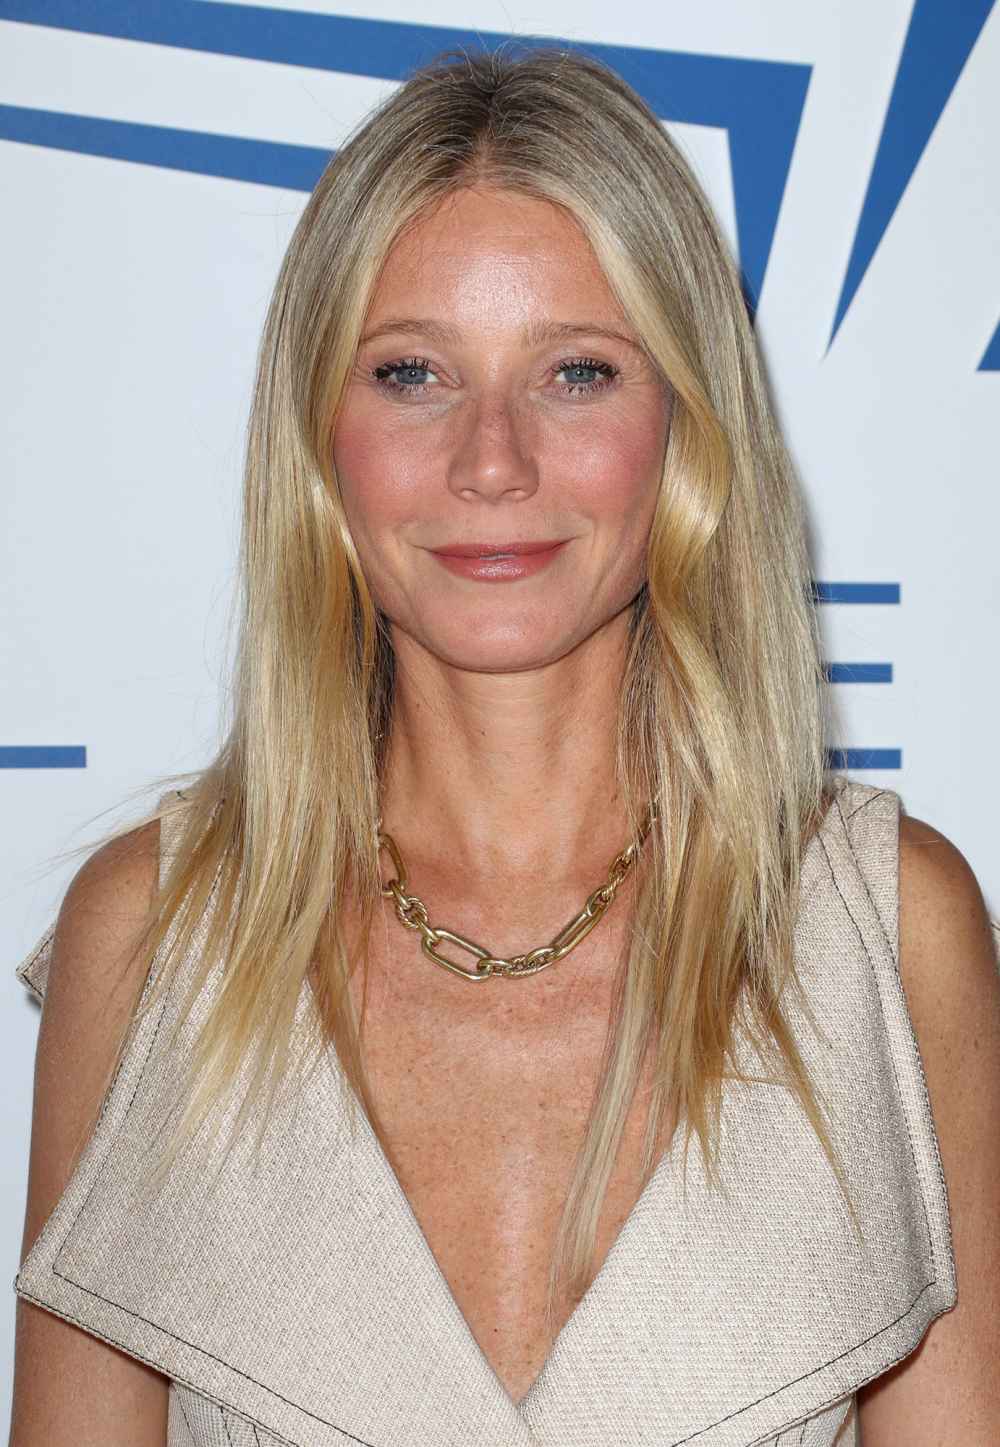 Gwyneth Paltrow Recalls 'Heartbreak' After Daughter Left for College